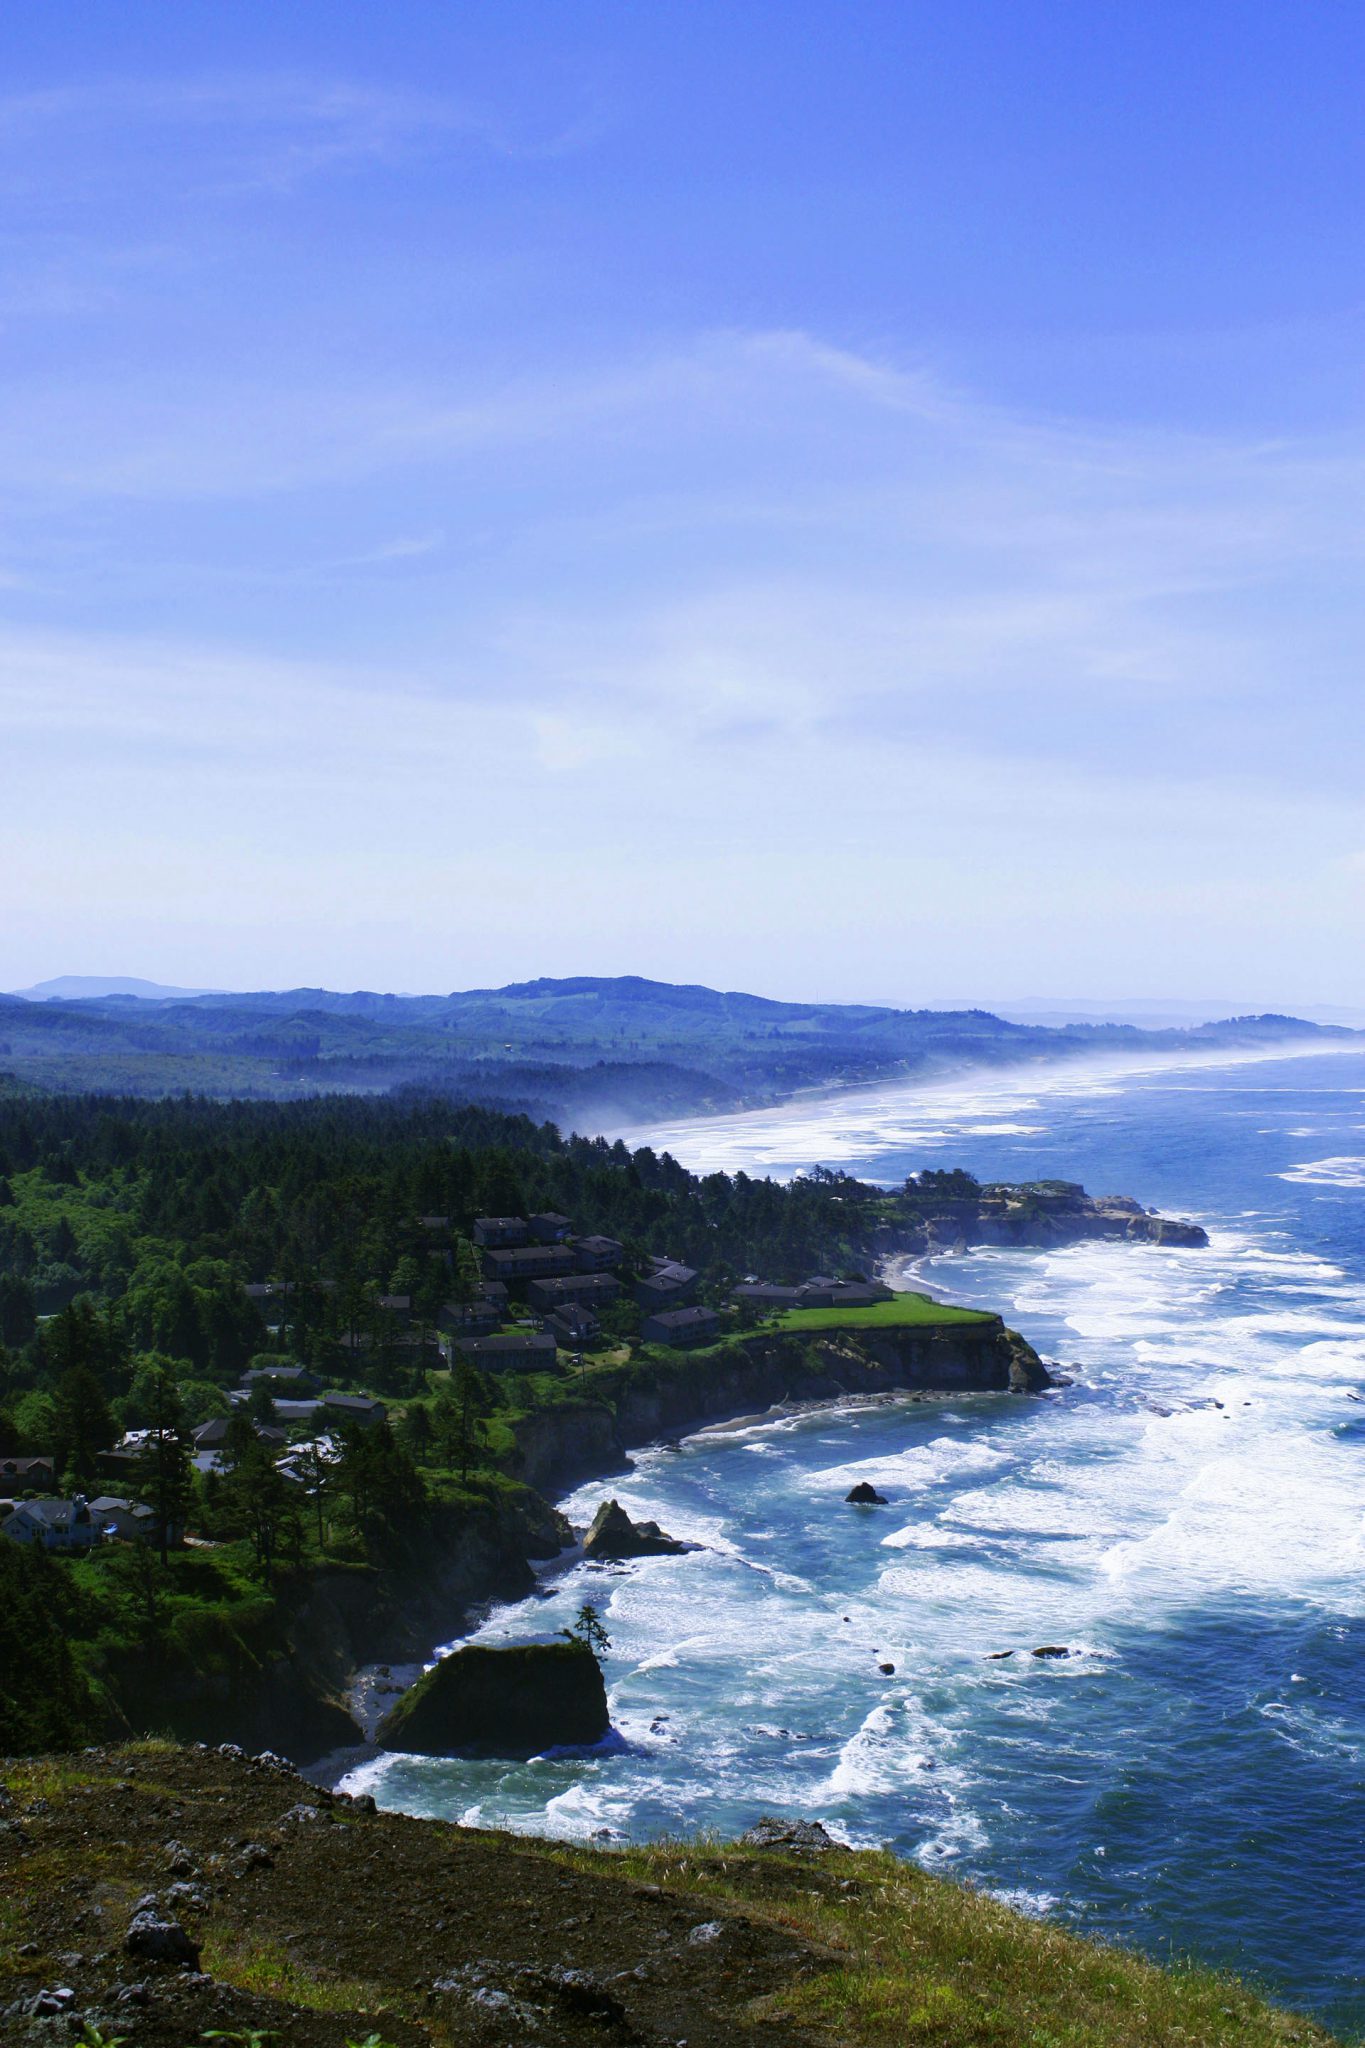 View of Otter Rock, Oregon